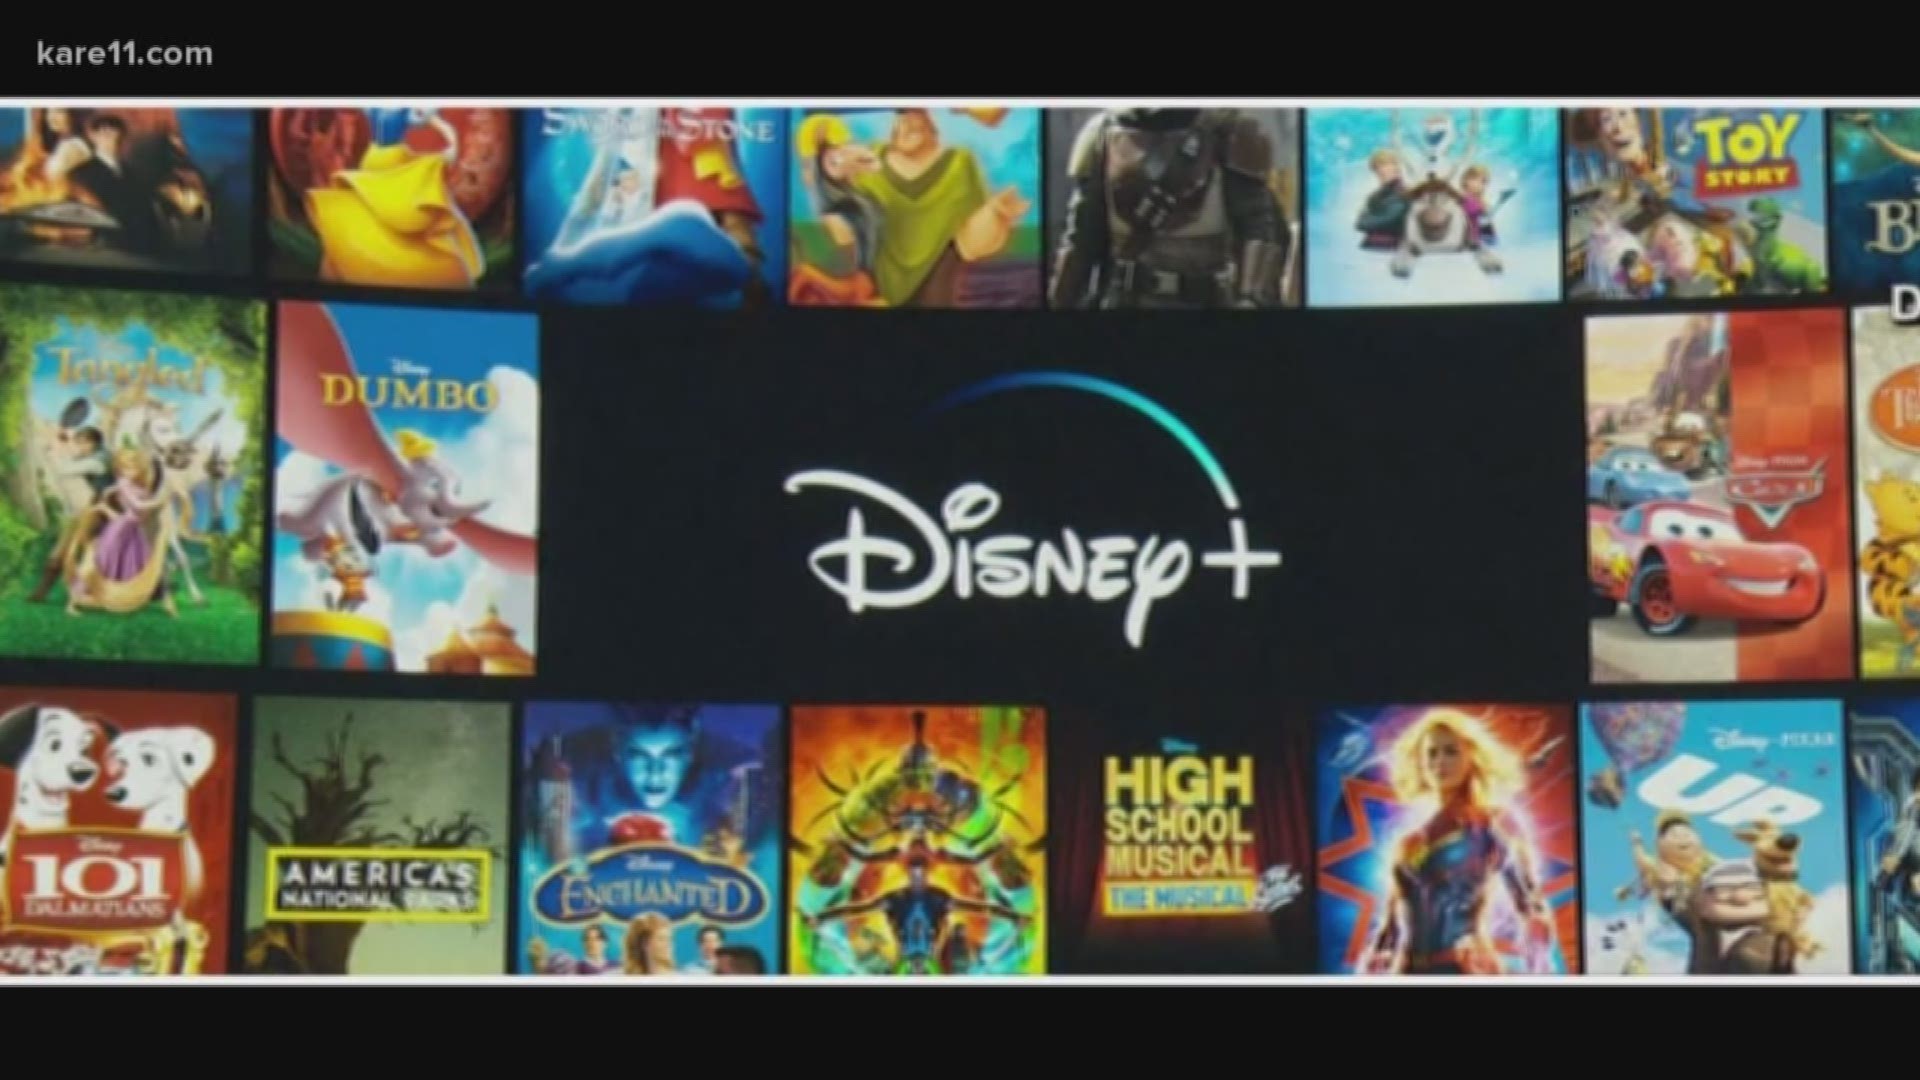 Disney+ rolls out in November.